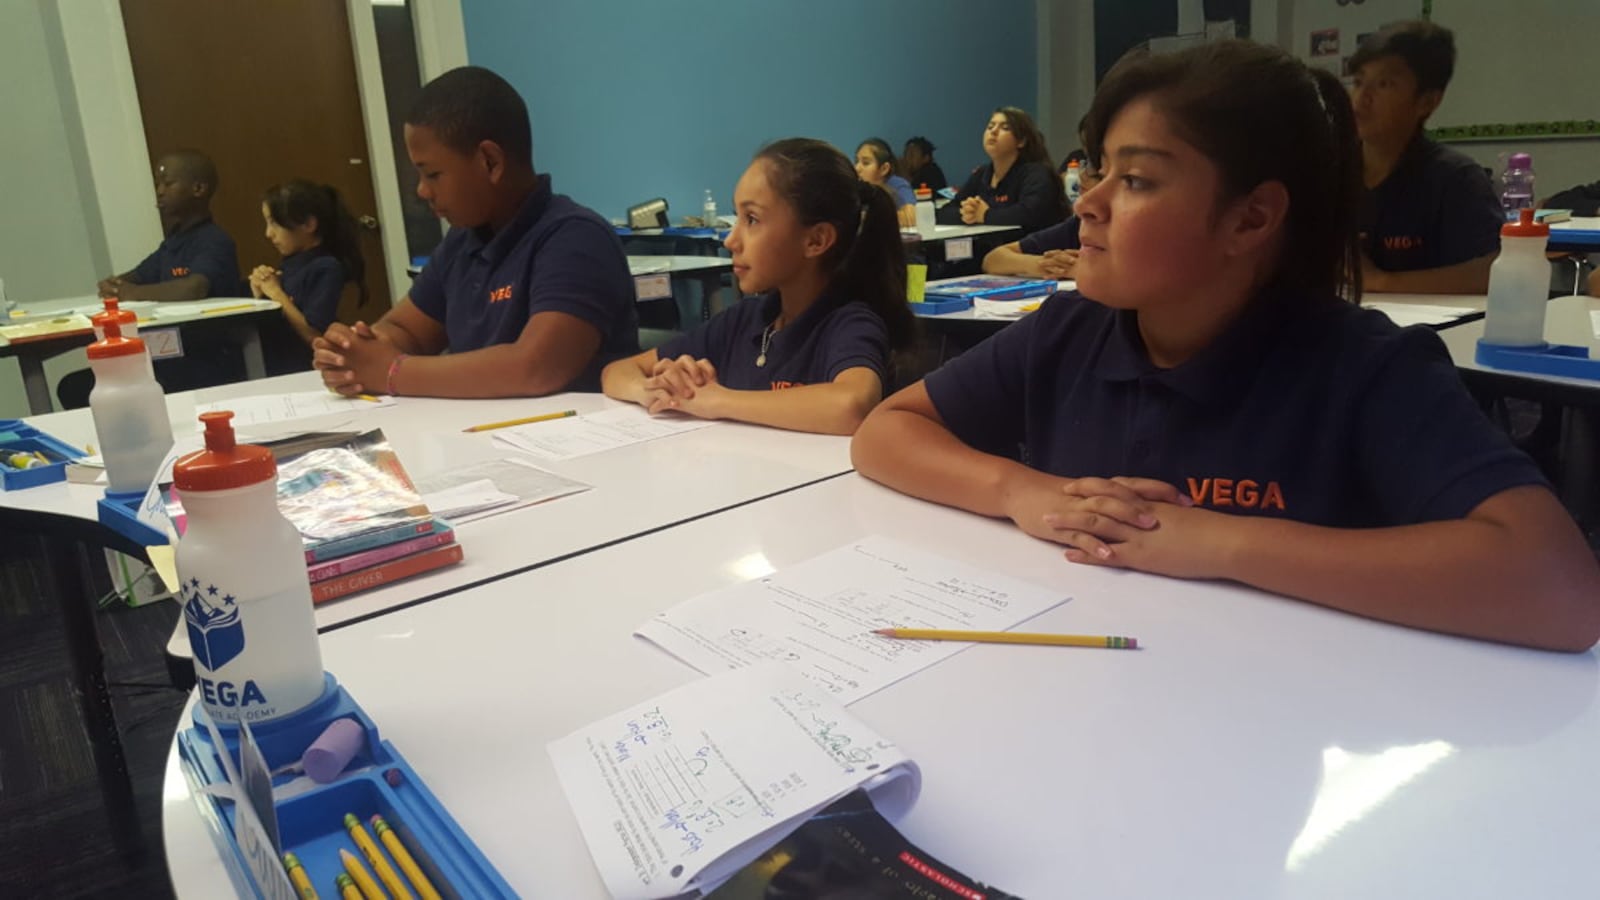 Sixth graders listen to a math lesson at Vega Collegiate Academy in Aurora during a September 2018 class.